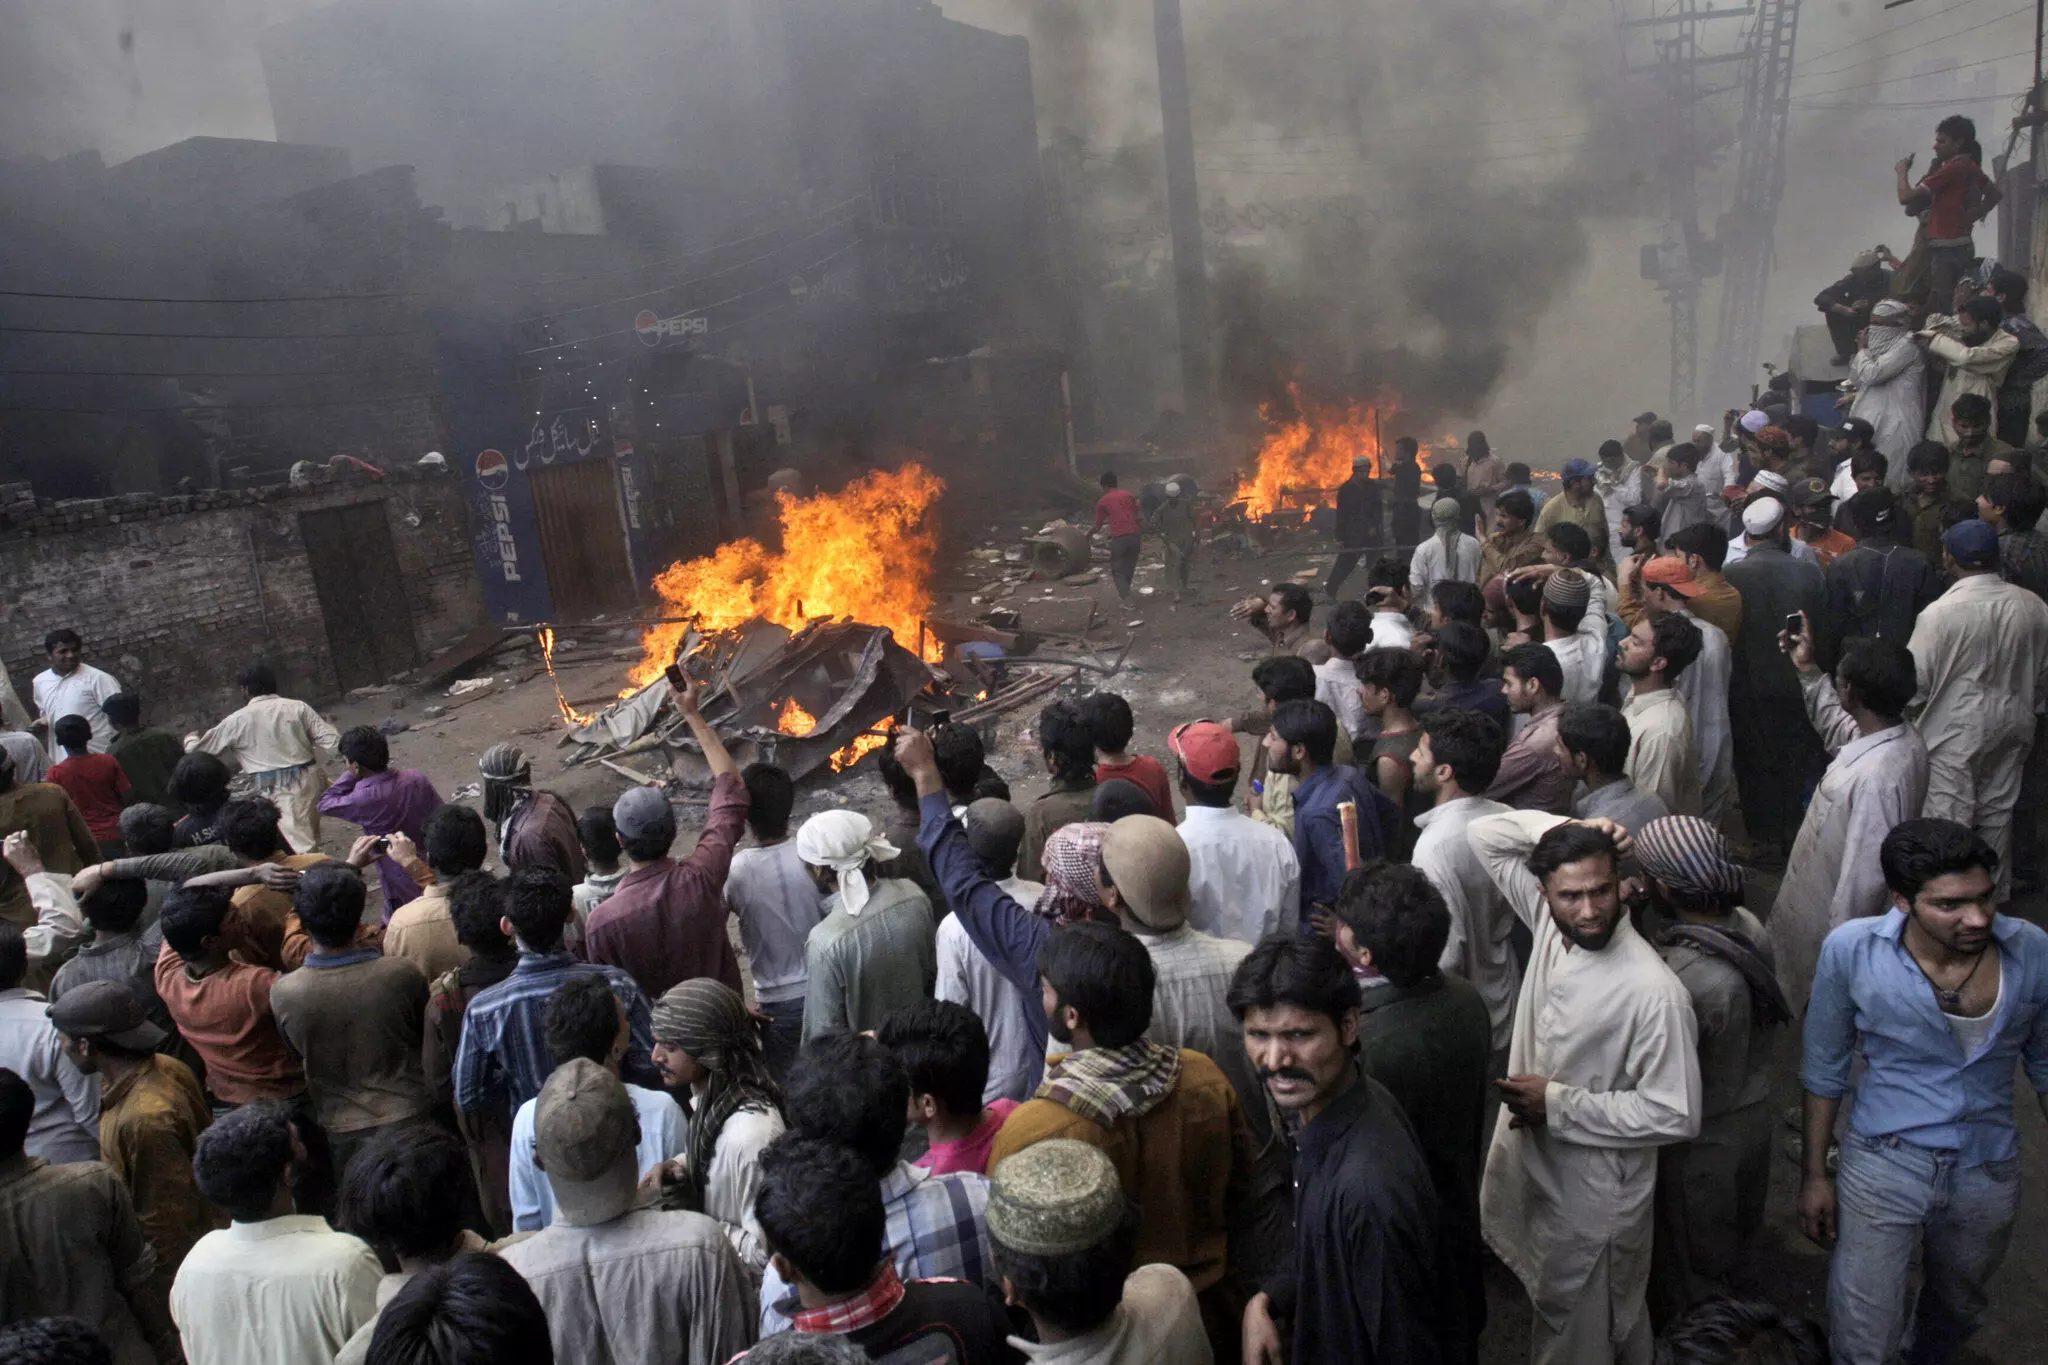 Angry mob attacks churches in Pakistan over allegations of blasphemy